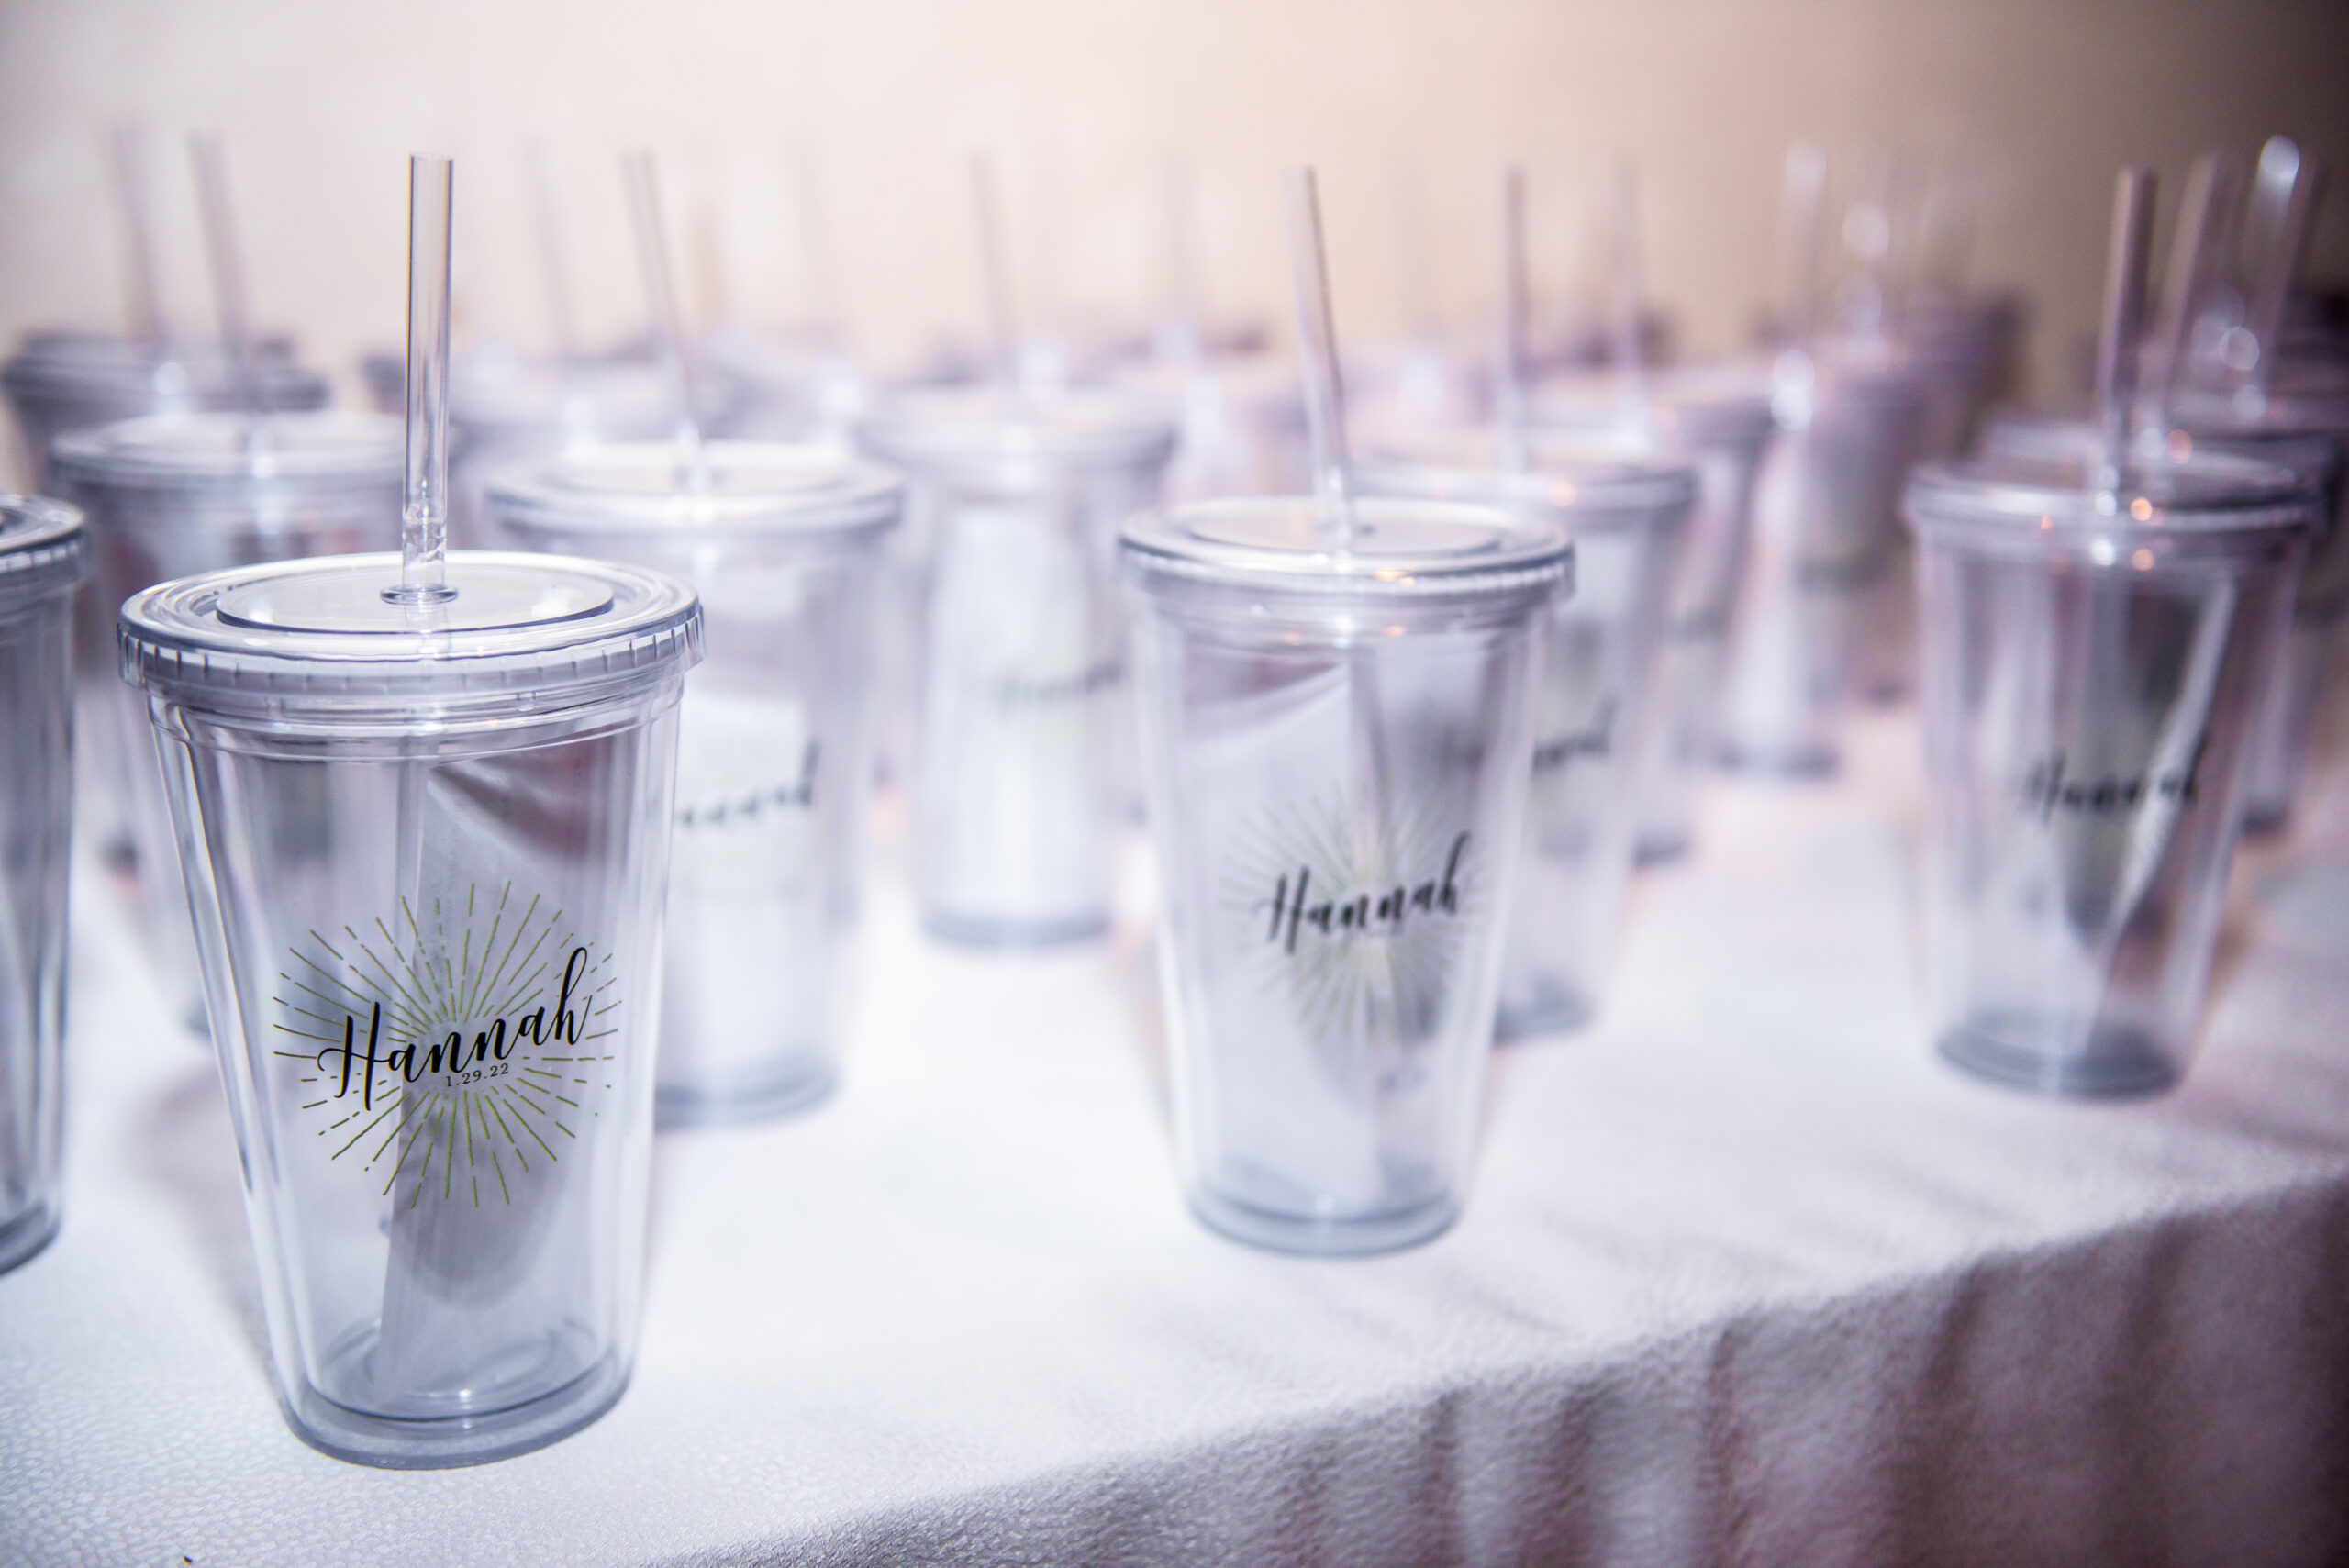 Water tumblers | Pop Color Events | Adding a Pop of Color to Bar & Bat Mitzvahs in DC, MD & VA | Photo by: Jacie Lee Almira Photography